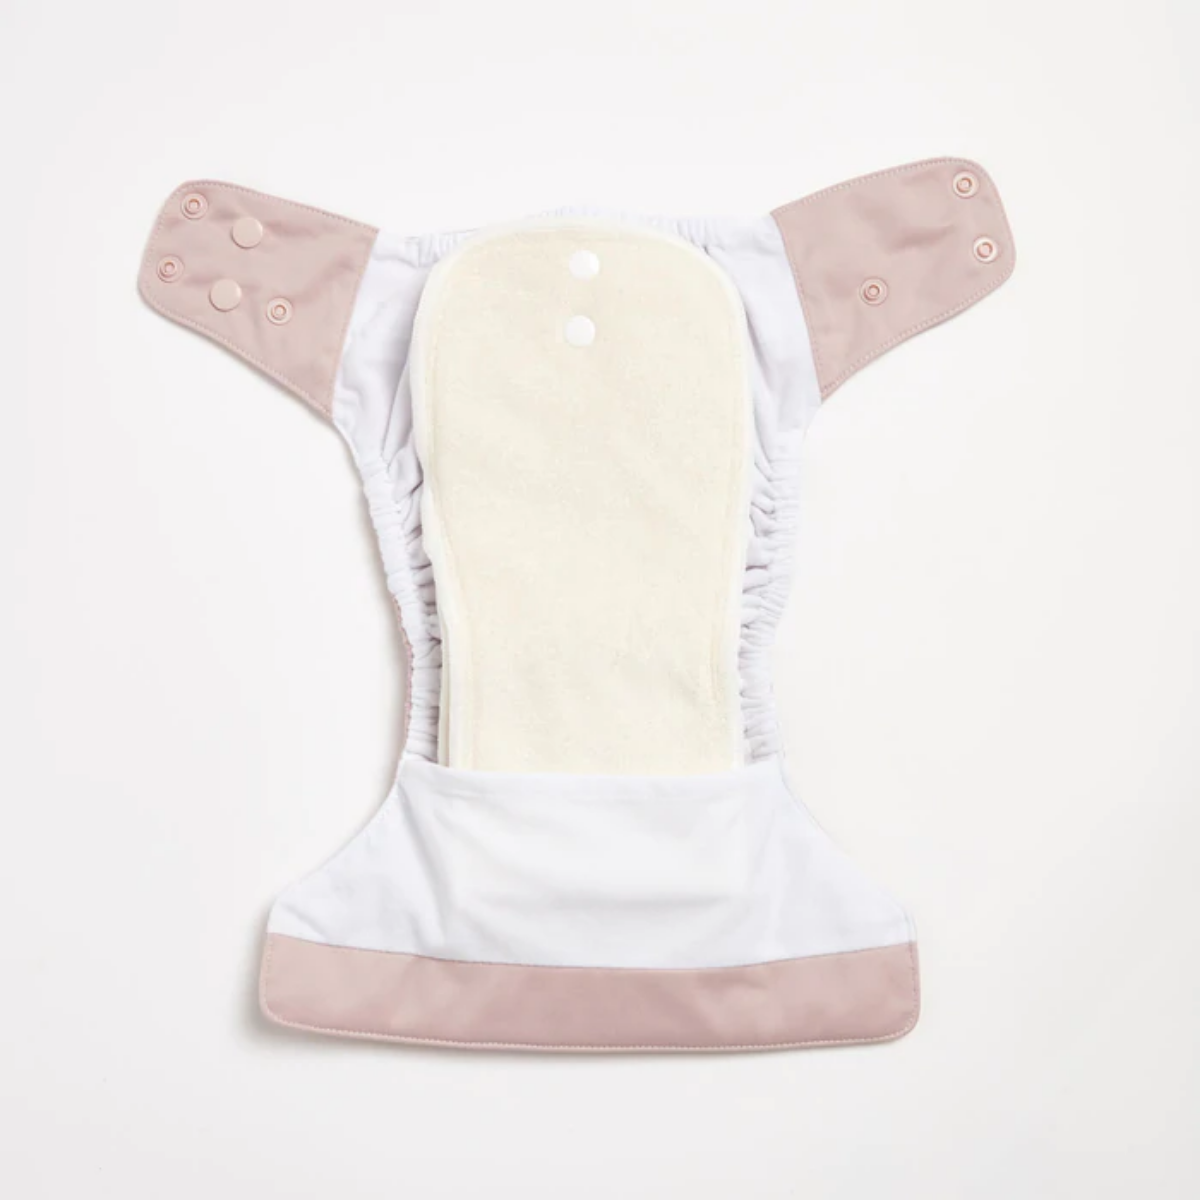 An open Dusty Rose 2.0 Modern Cloth Nappy by EcoNaps on a white surface.